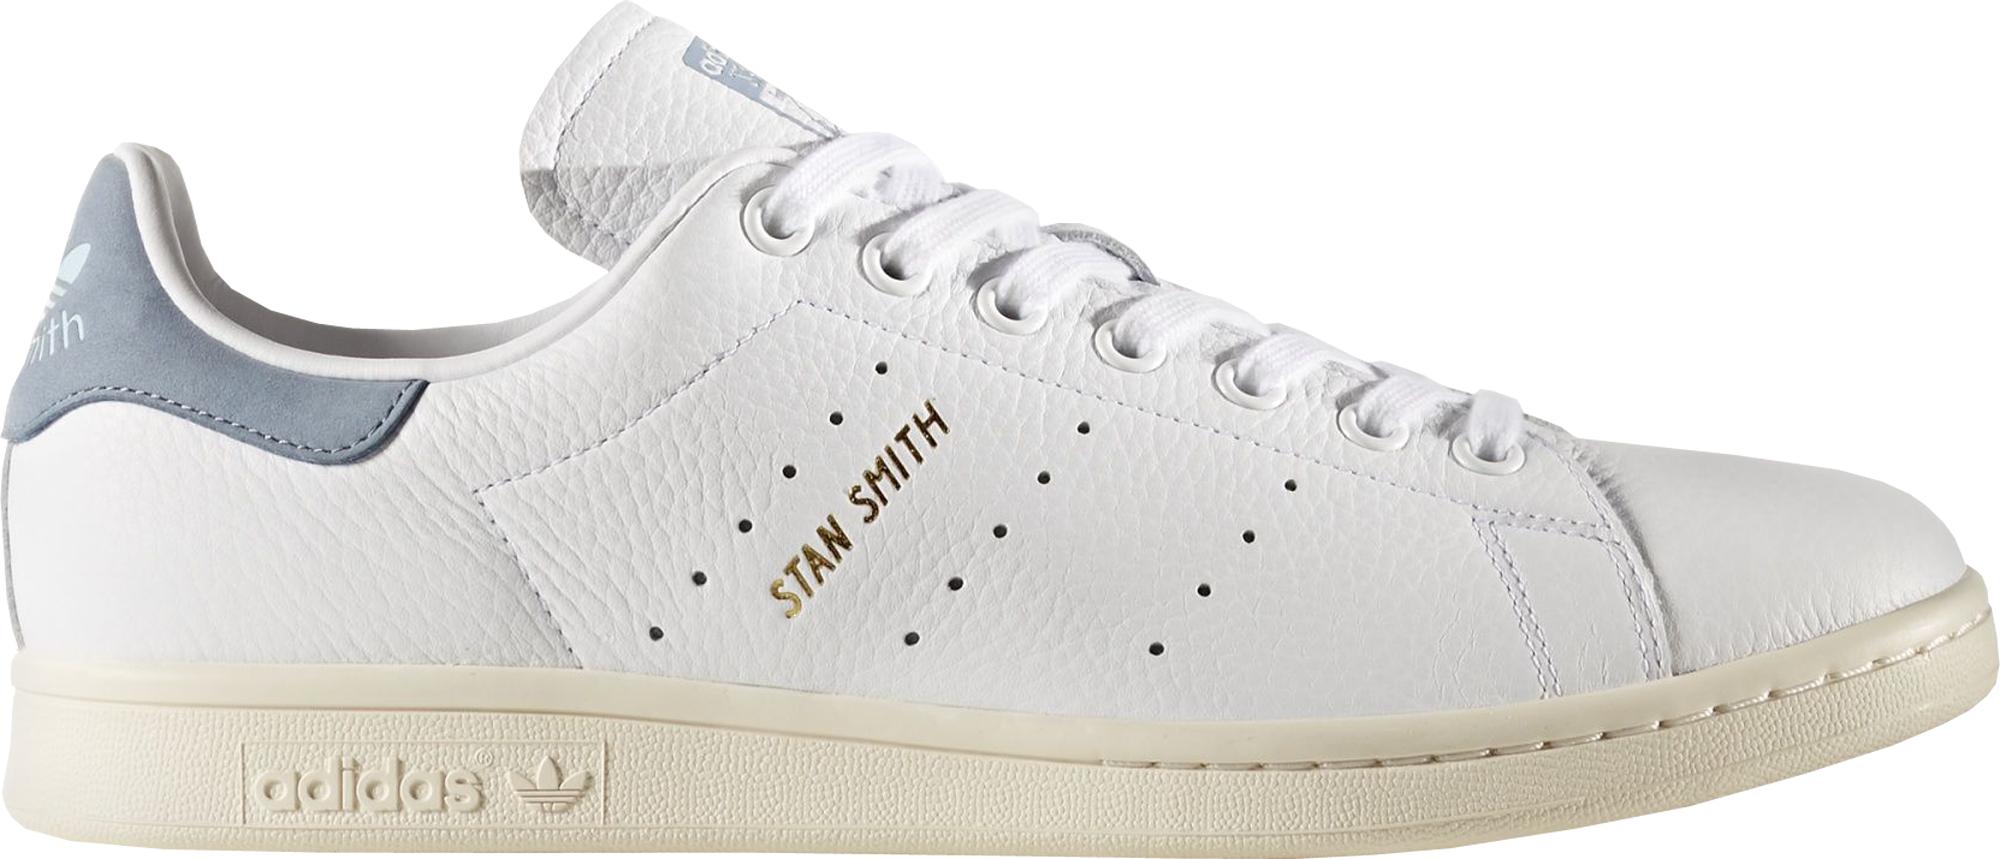 stan smith tactile blue